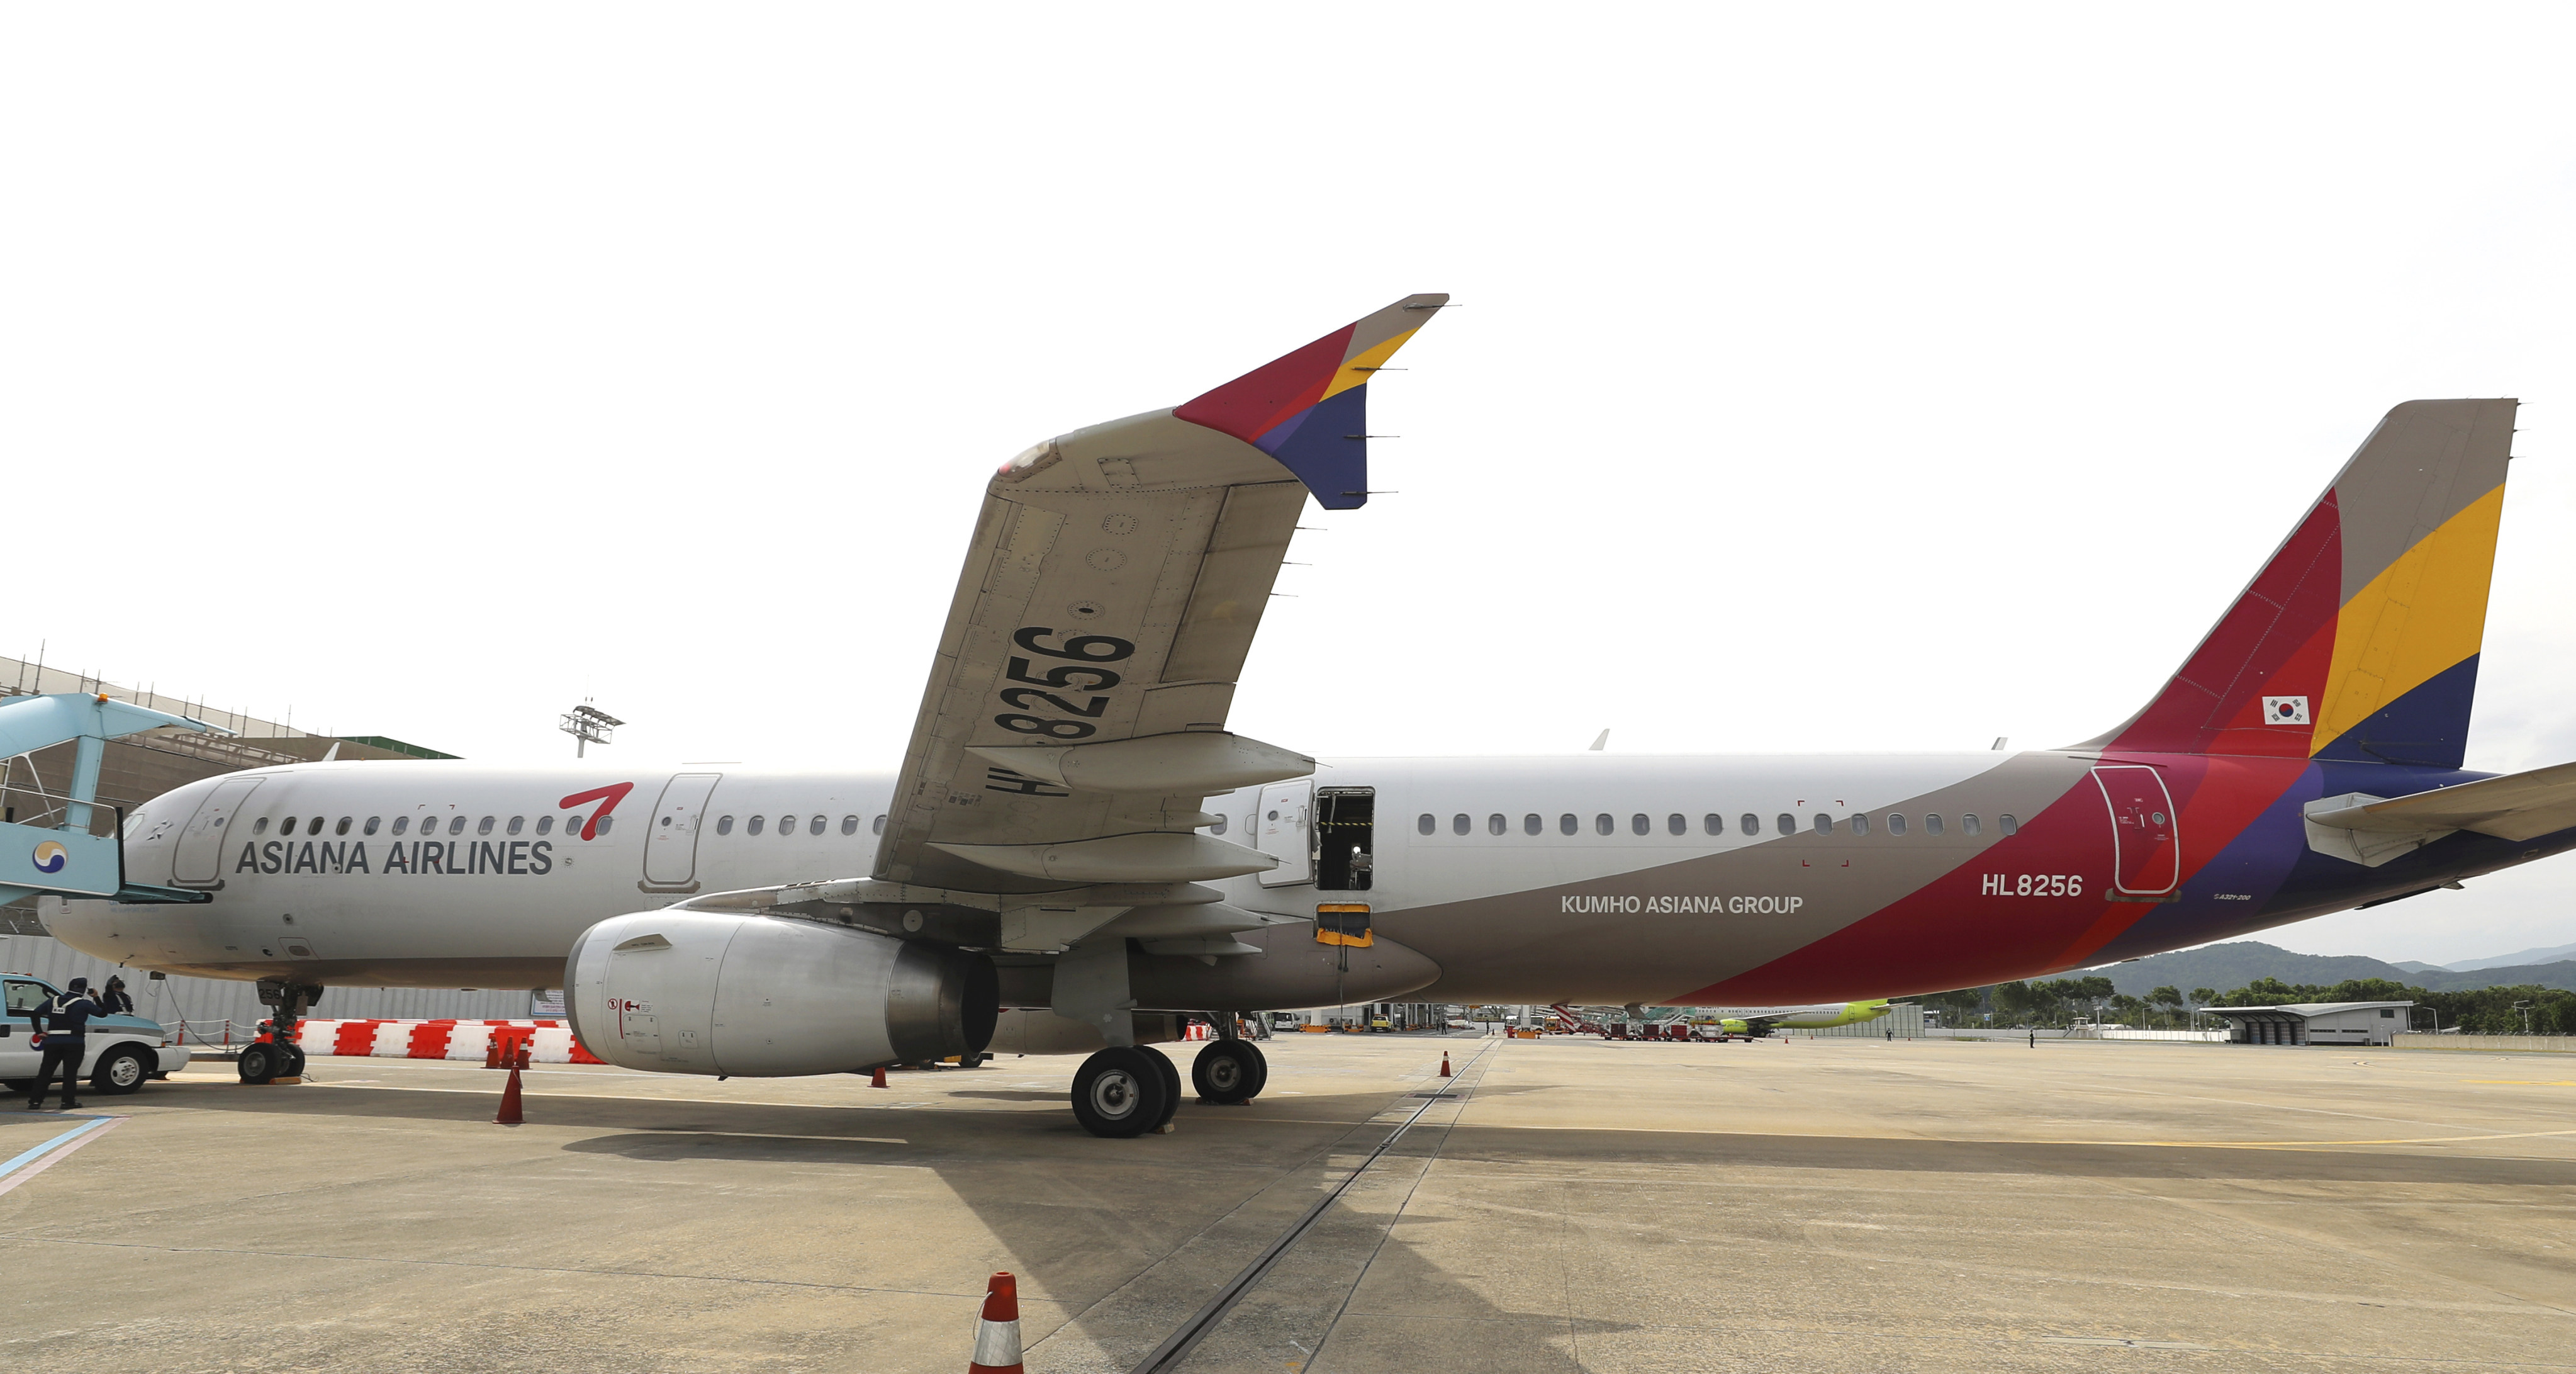 A passenger opened a door on an Asiana Airlines flight that later landed safely at Daegu airport on May 26. Photo: Yonhap via AP